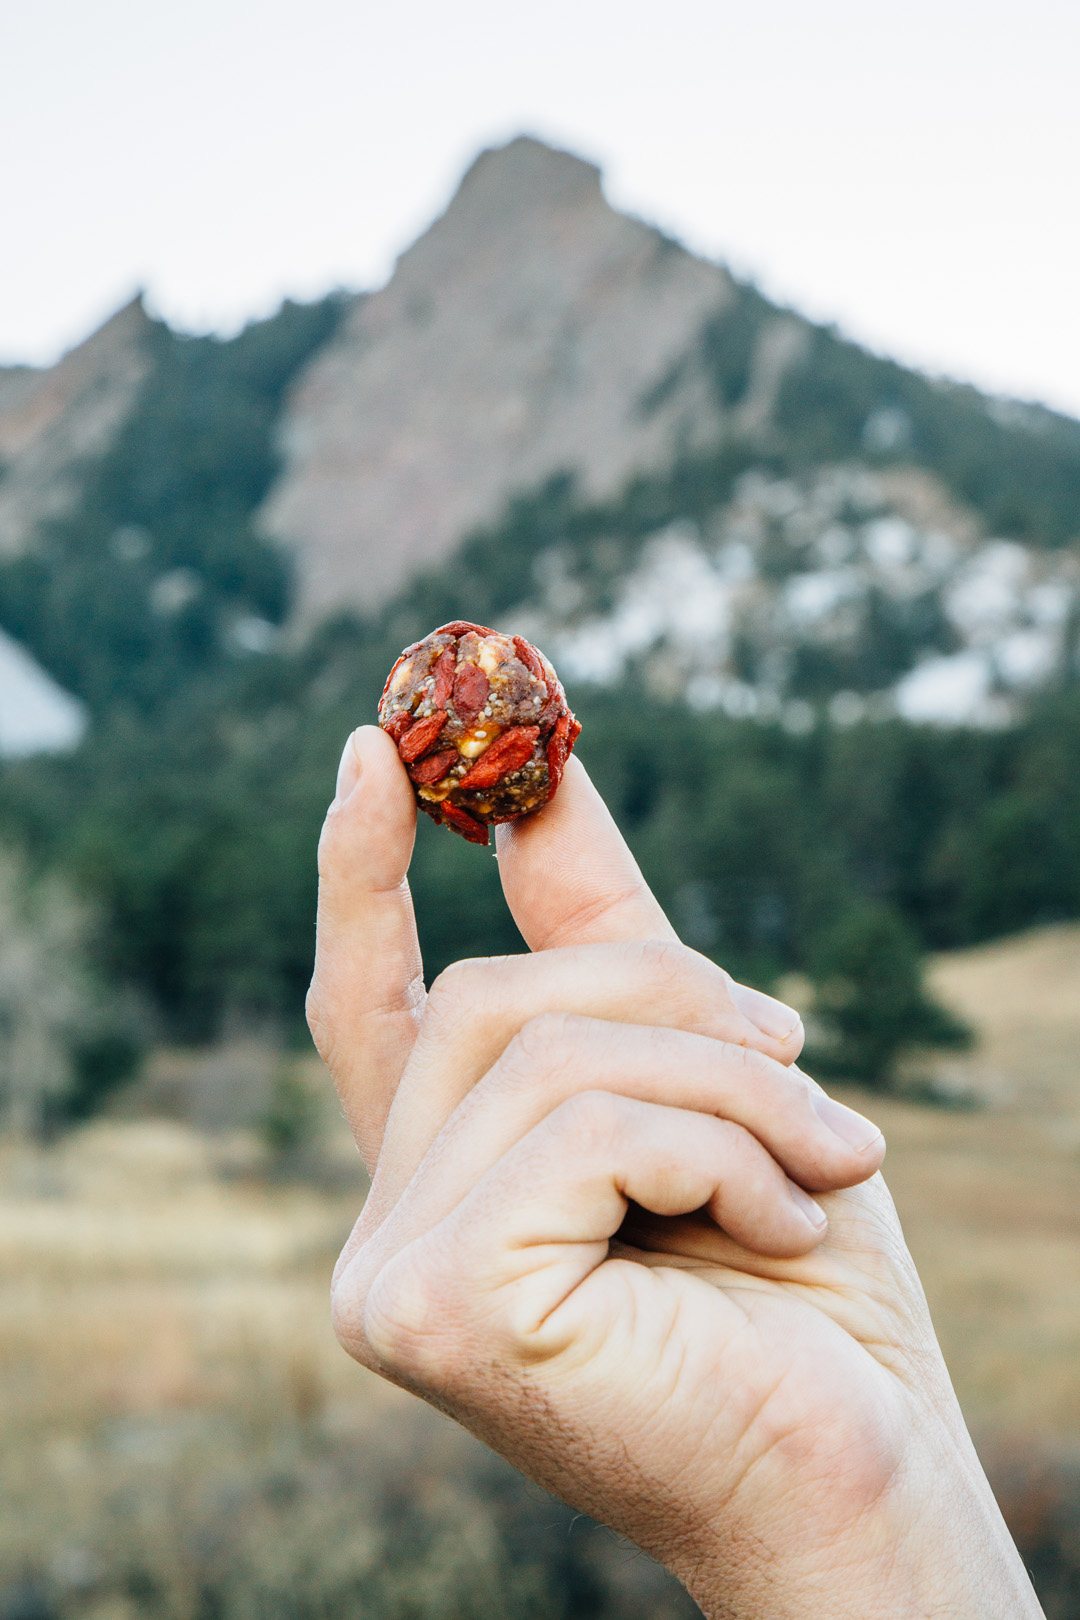 An easy make ahead snack for hiking or camping trips: Trail Mix Bliss Balls!